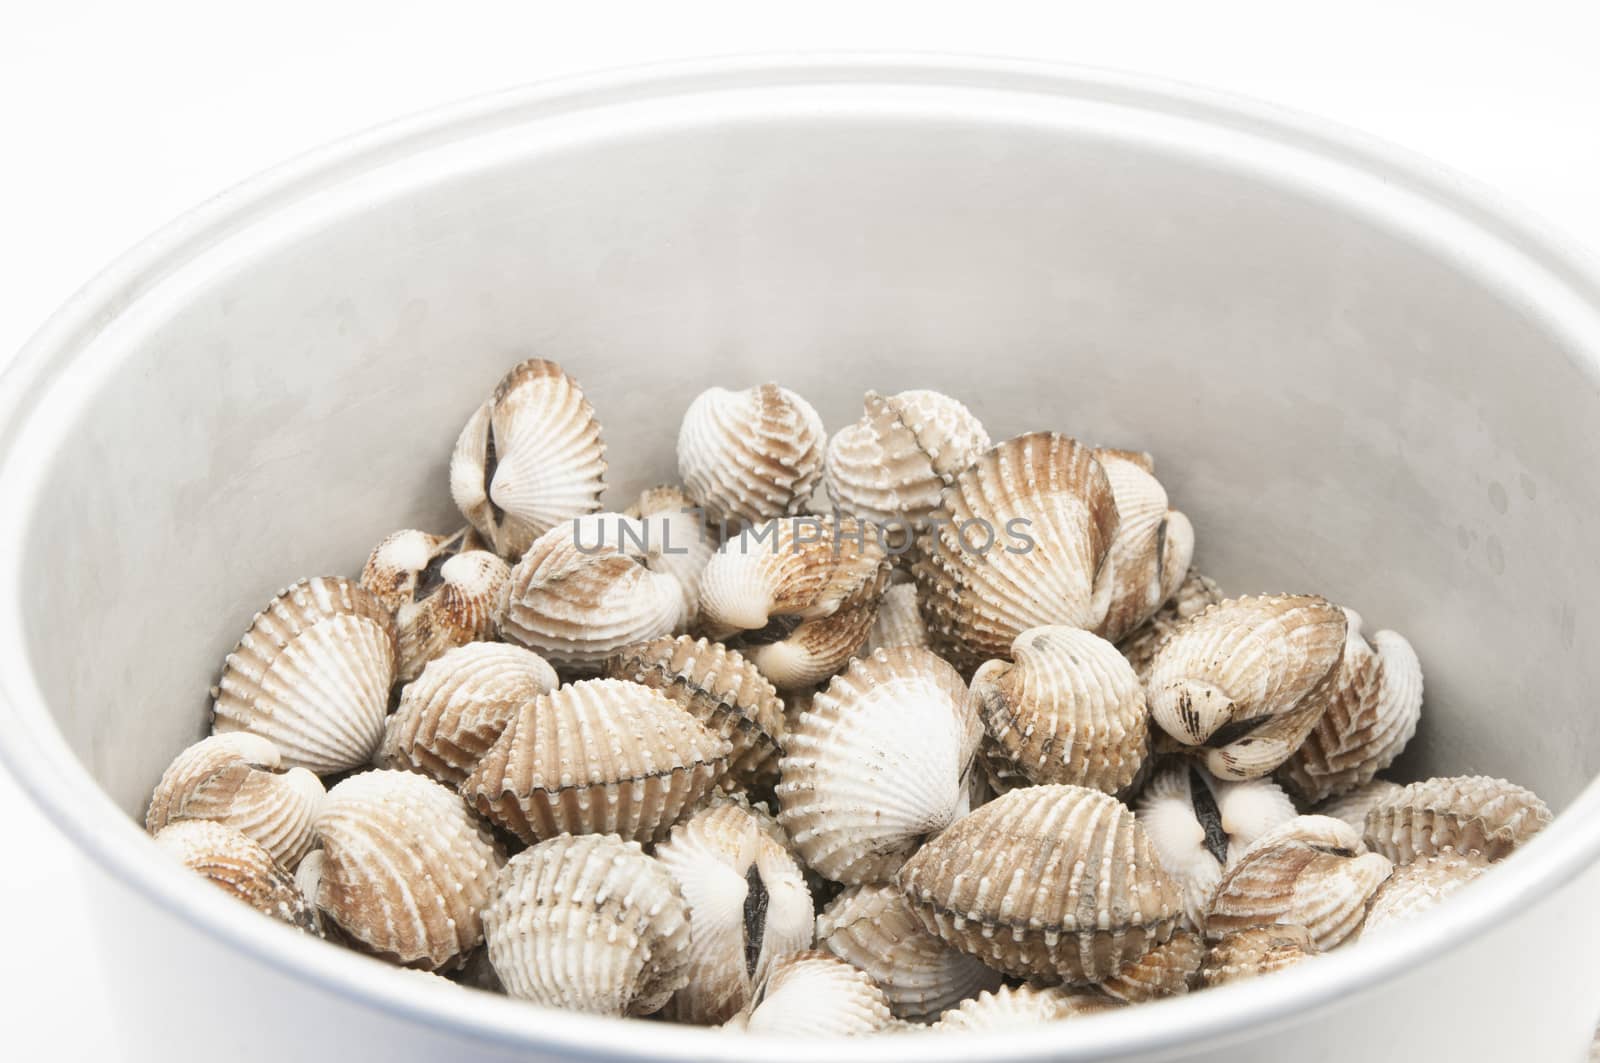 roughly fresh cockles on a white background